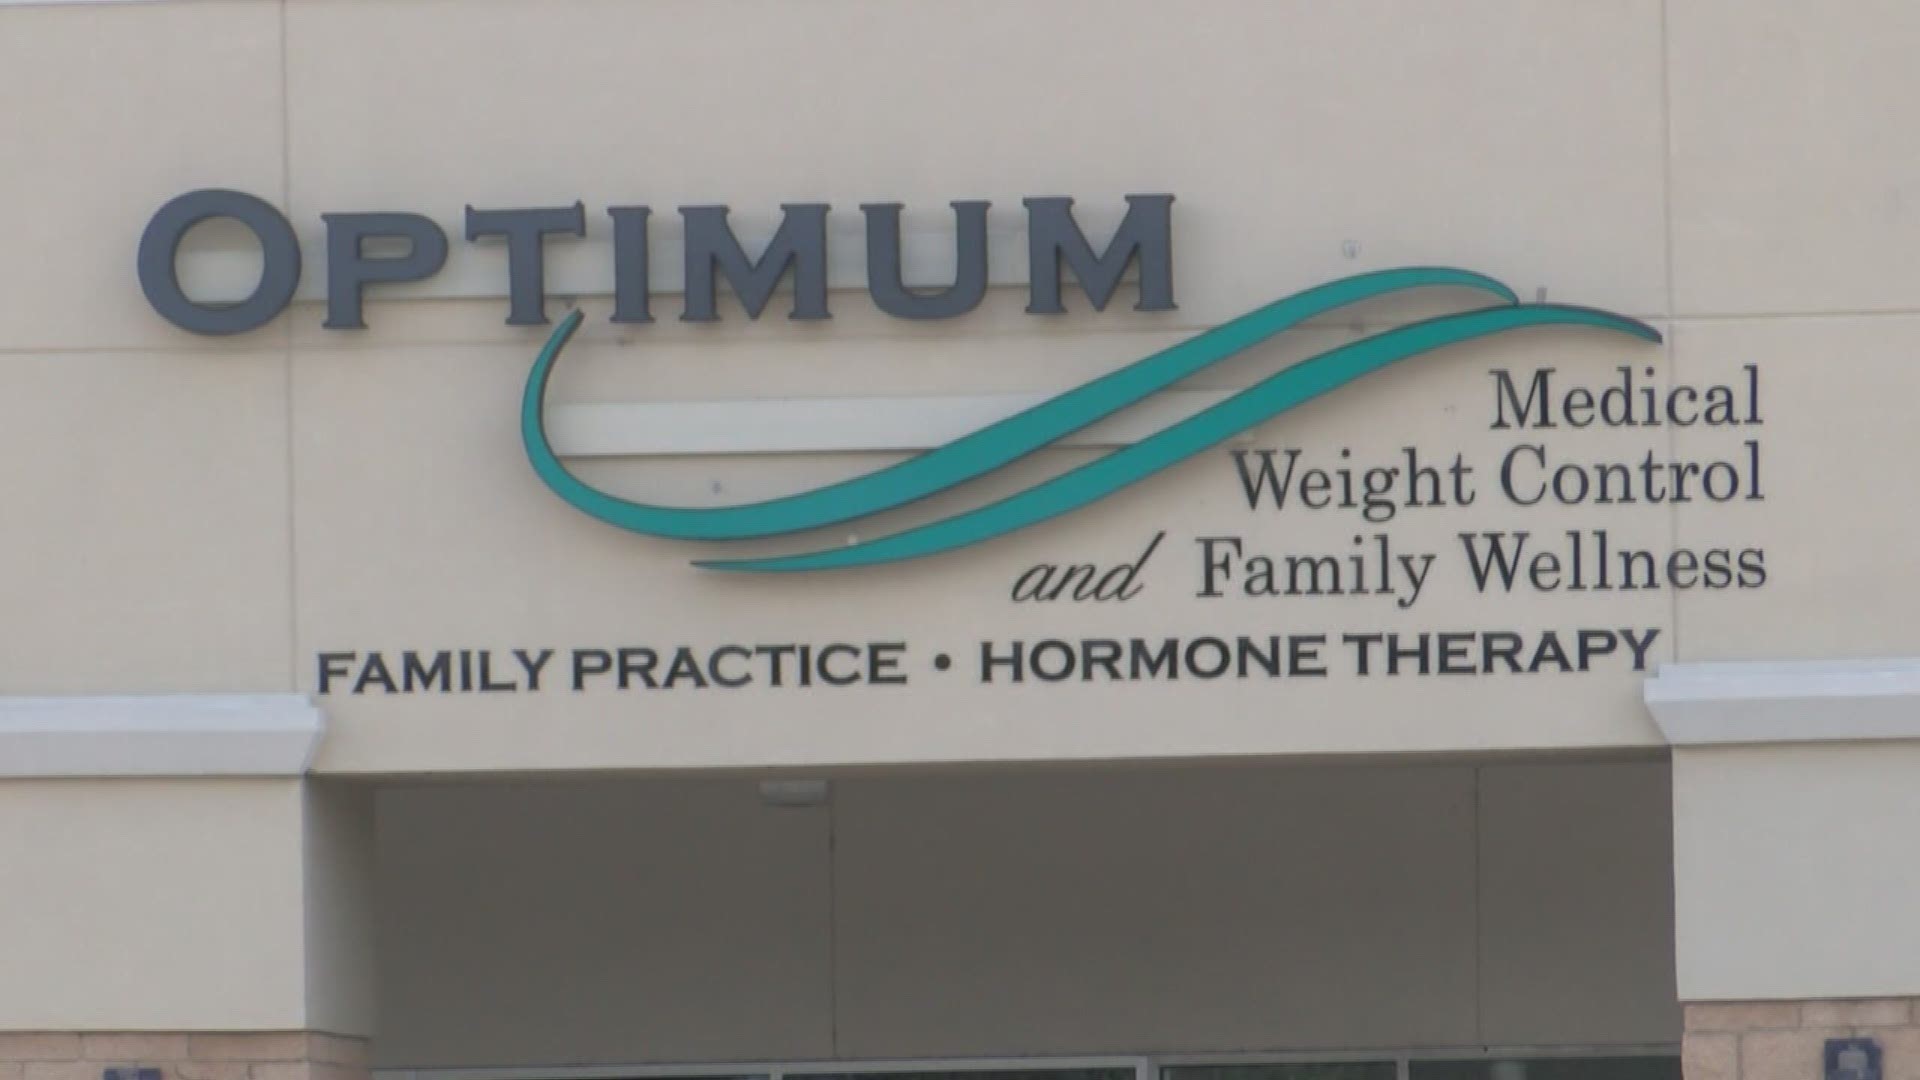 A Nederland nurse practitioner said he's being wrongfully accused for an 'inappropriate use of hormones' at his practice.